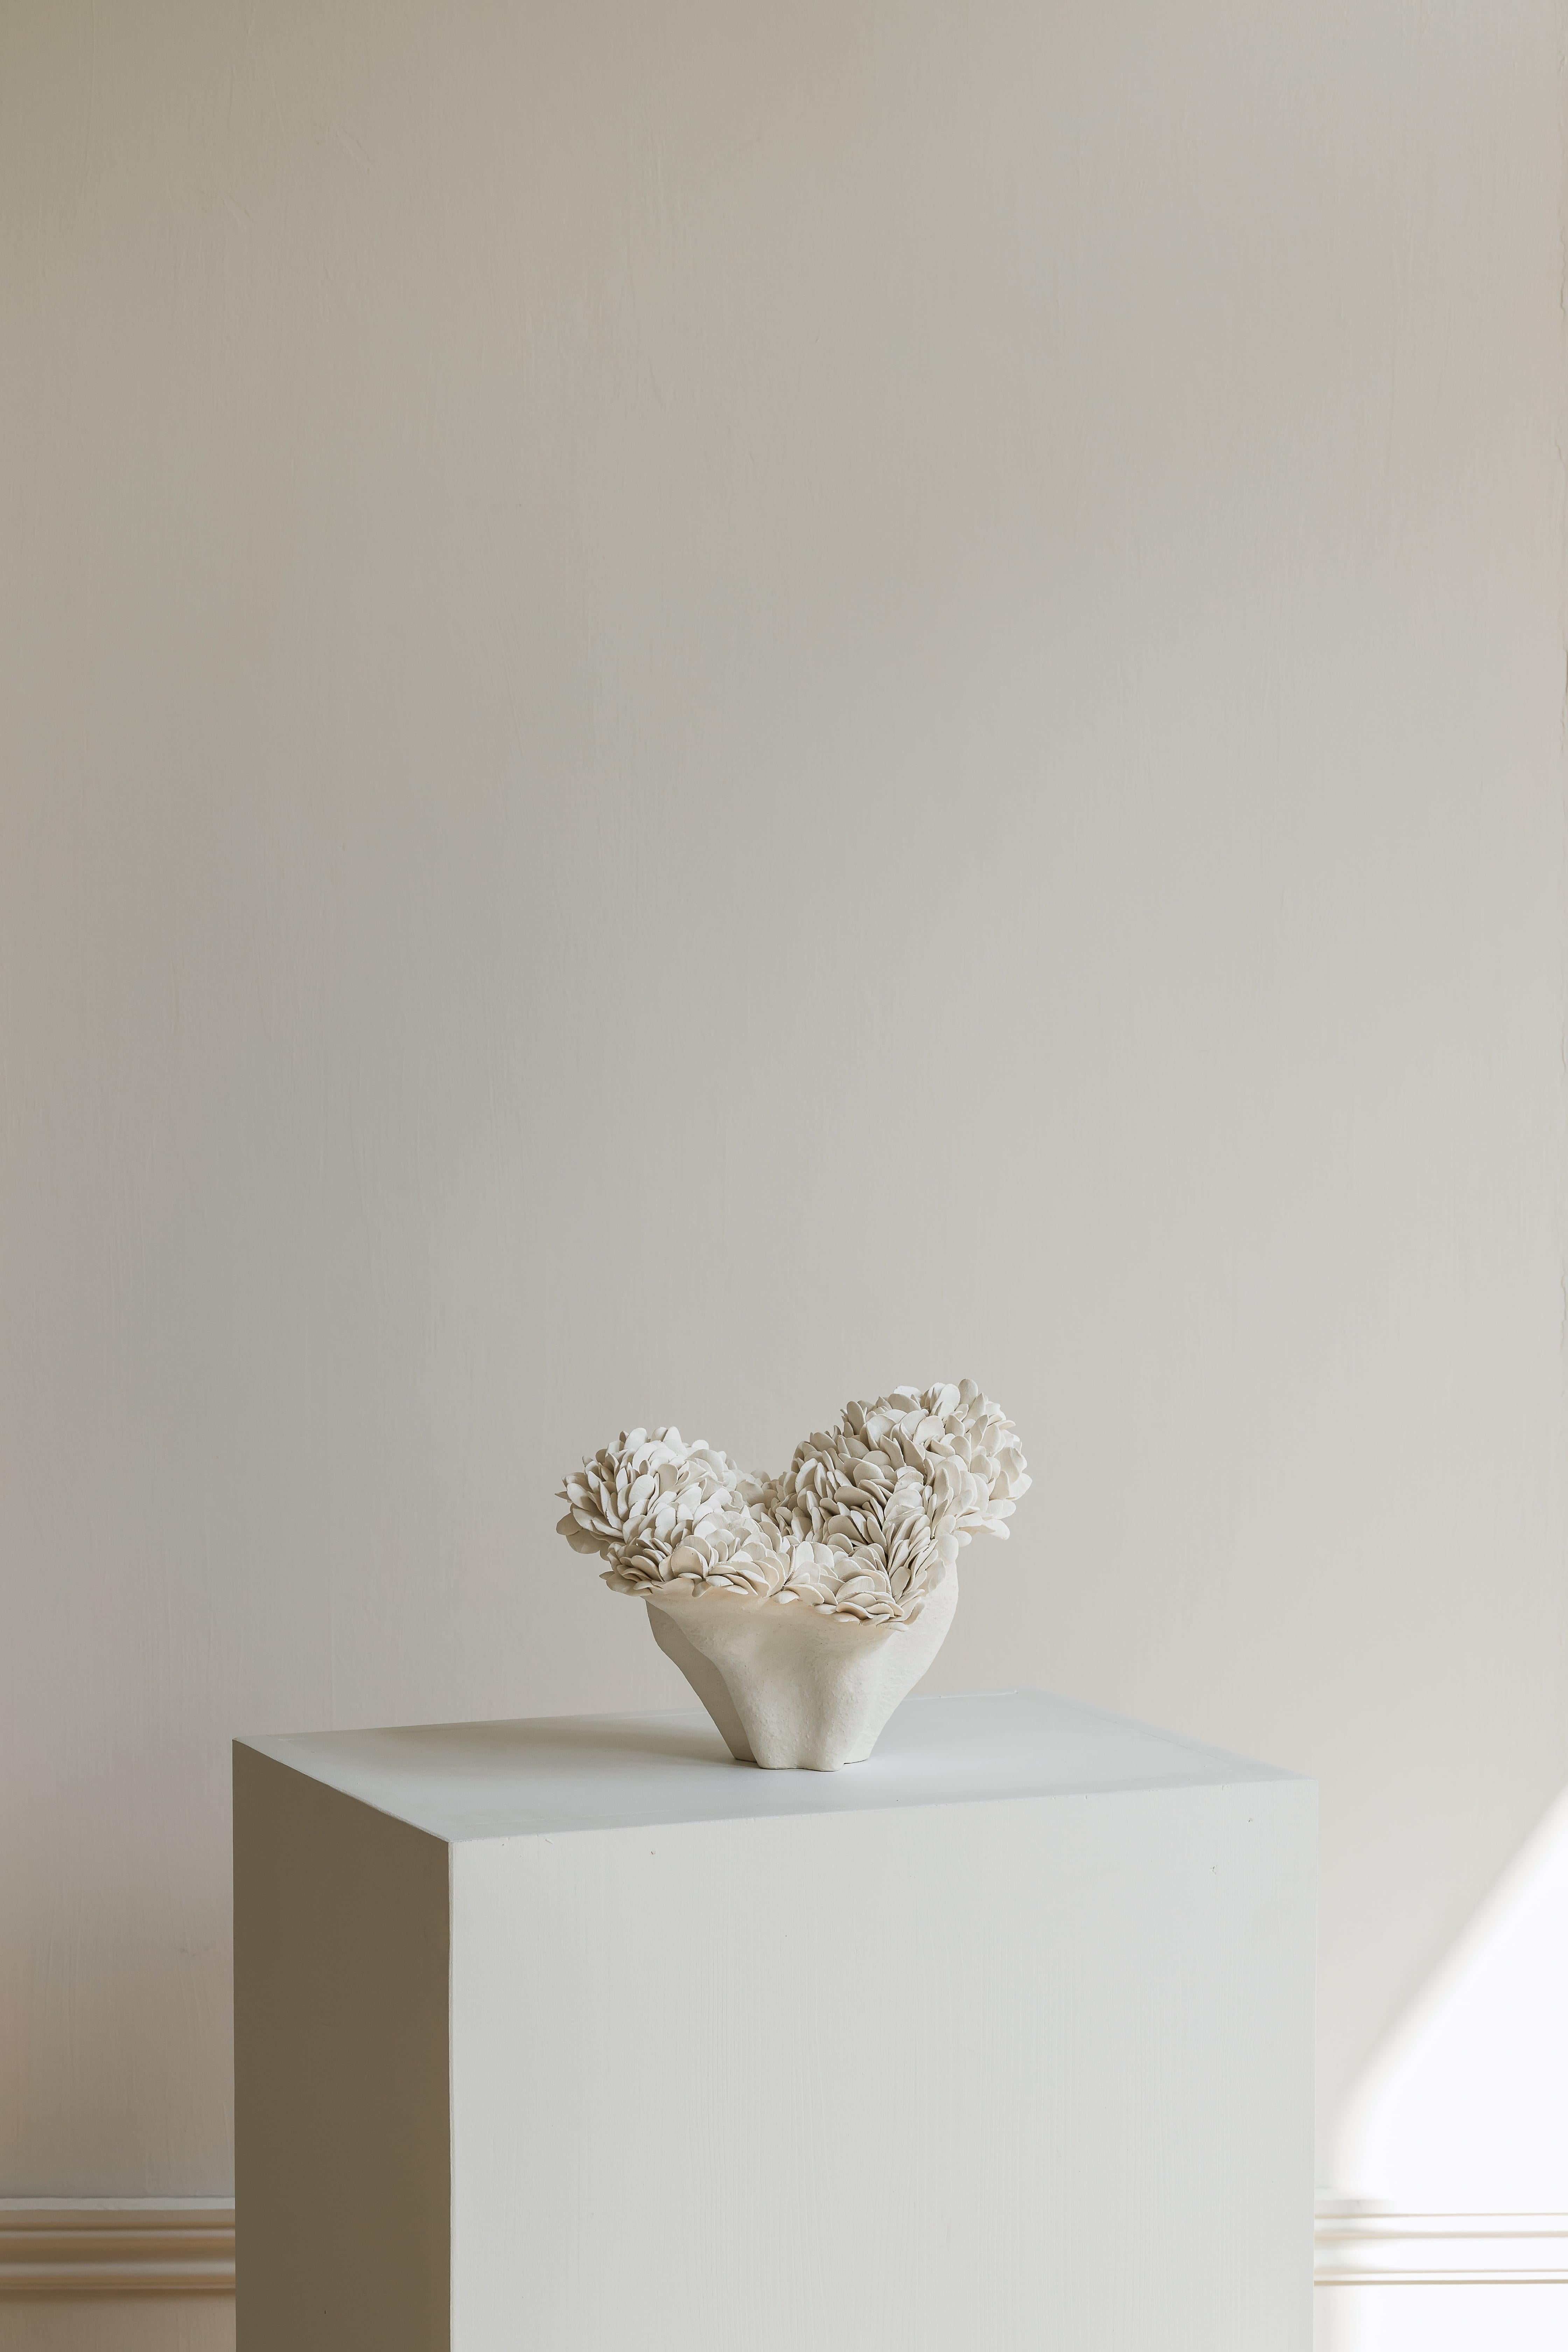 Nubes Petit sculpture by Hanna Heino
Dimensions: D 18 x W 22 x H 18 cm
Materials: Handbuilt, Stoneware Clay, Porcelain, Engobe.
Also available in different colors. 


Hanna Heino is a contemporary clay artist from Finland known for her